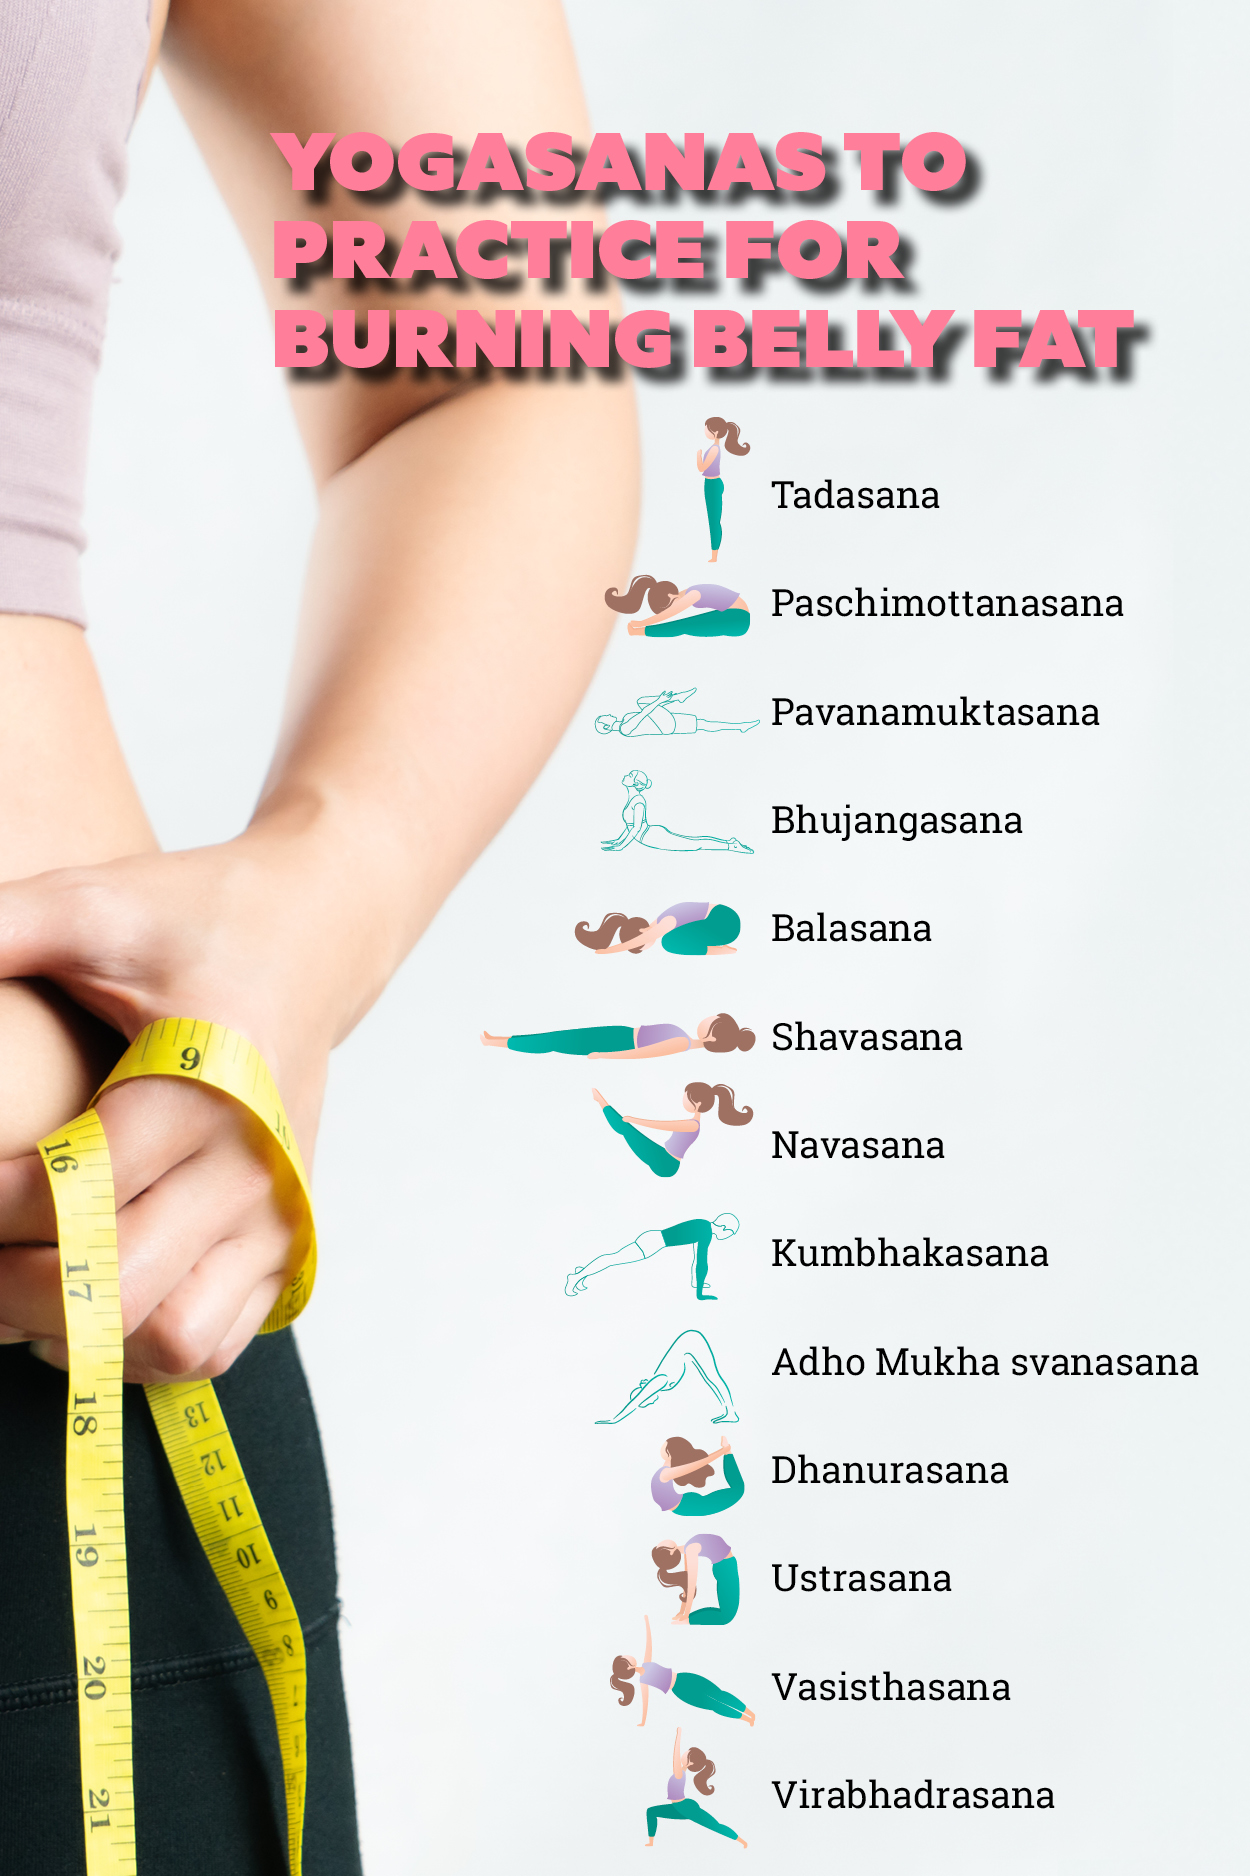 8 Exercises and Yoga Asanas to Melt Away Belly Fat / Bright Side